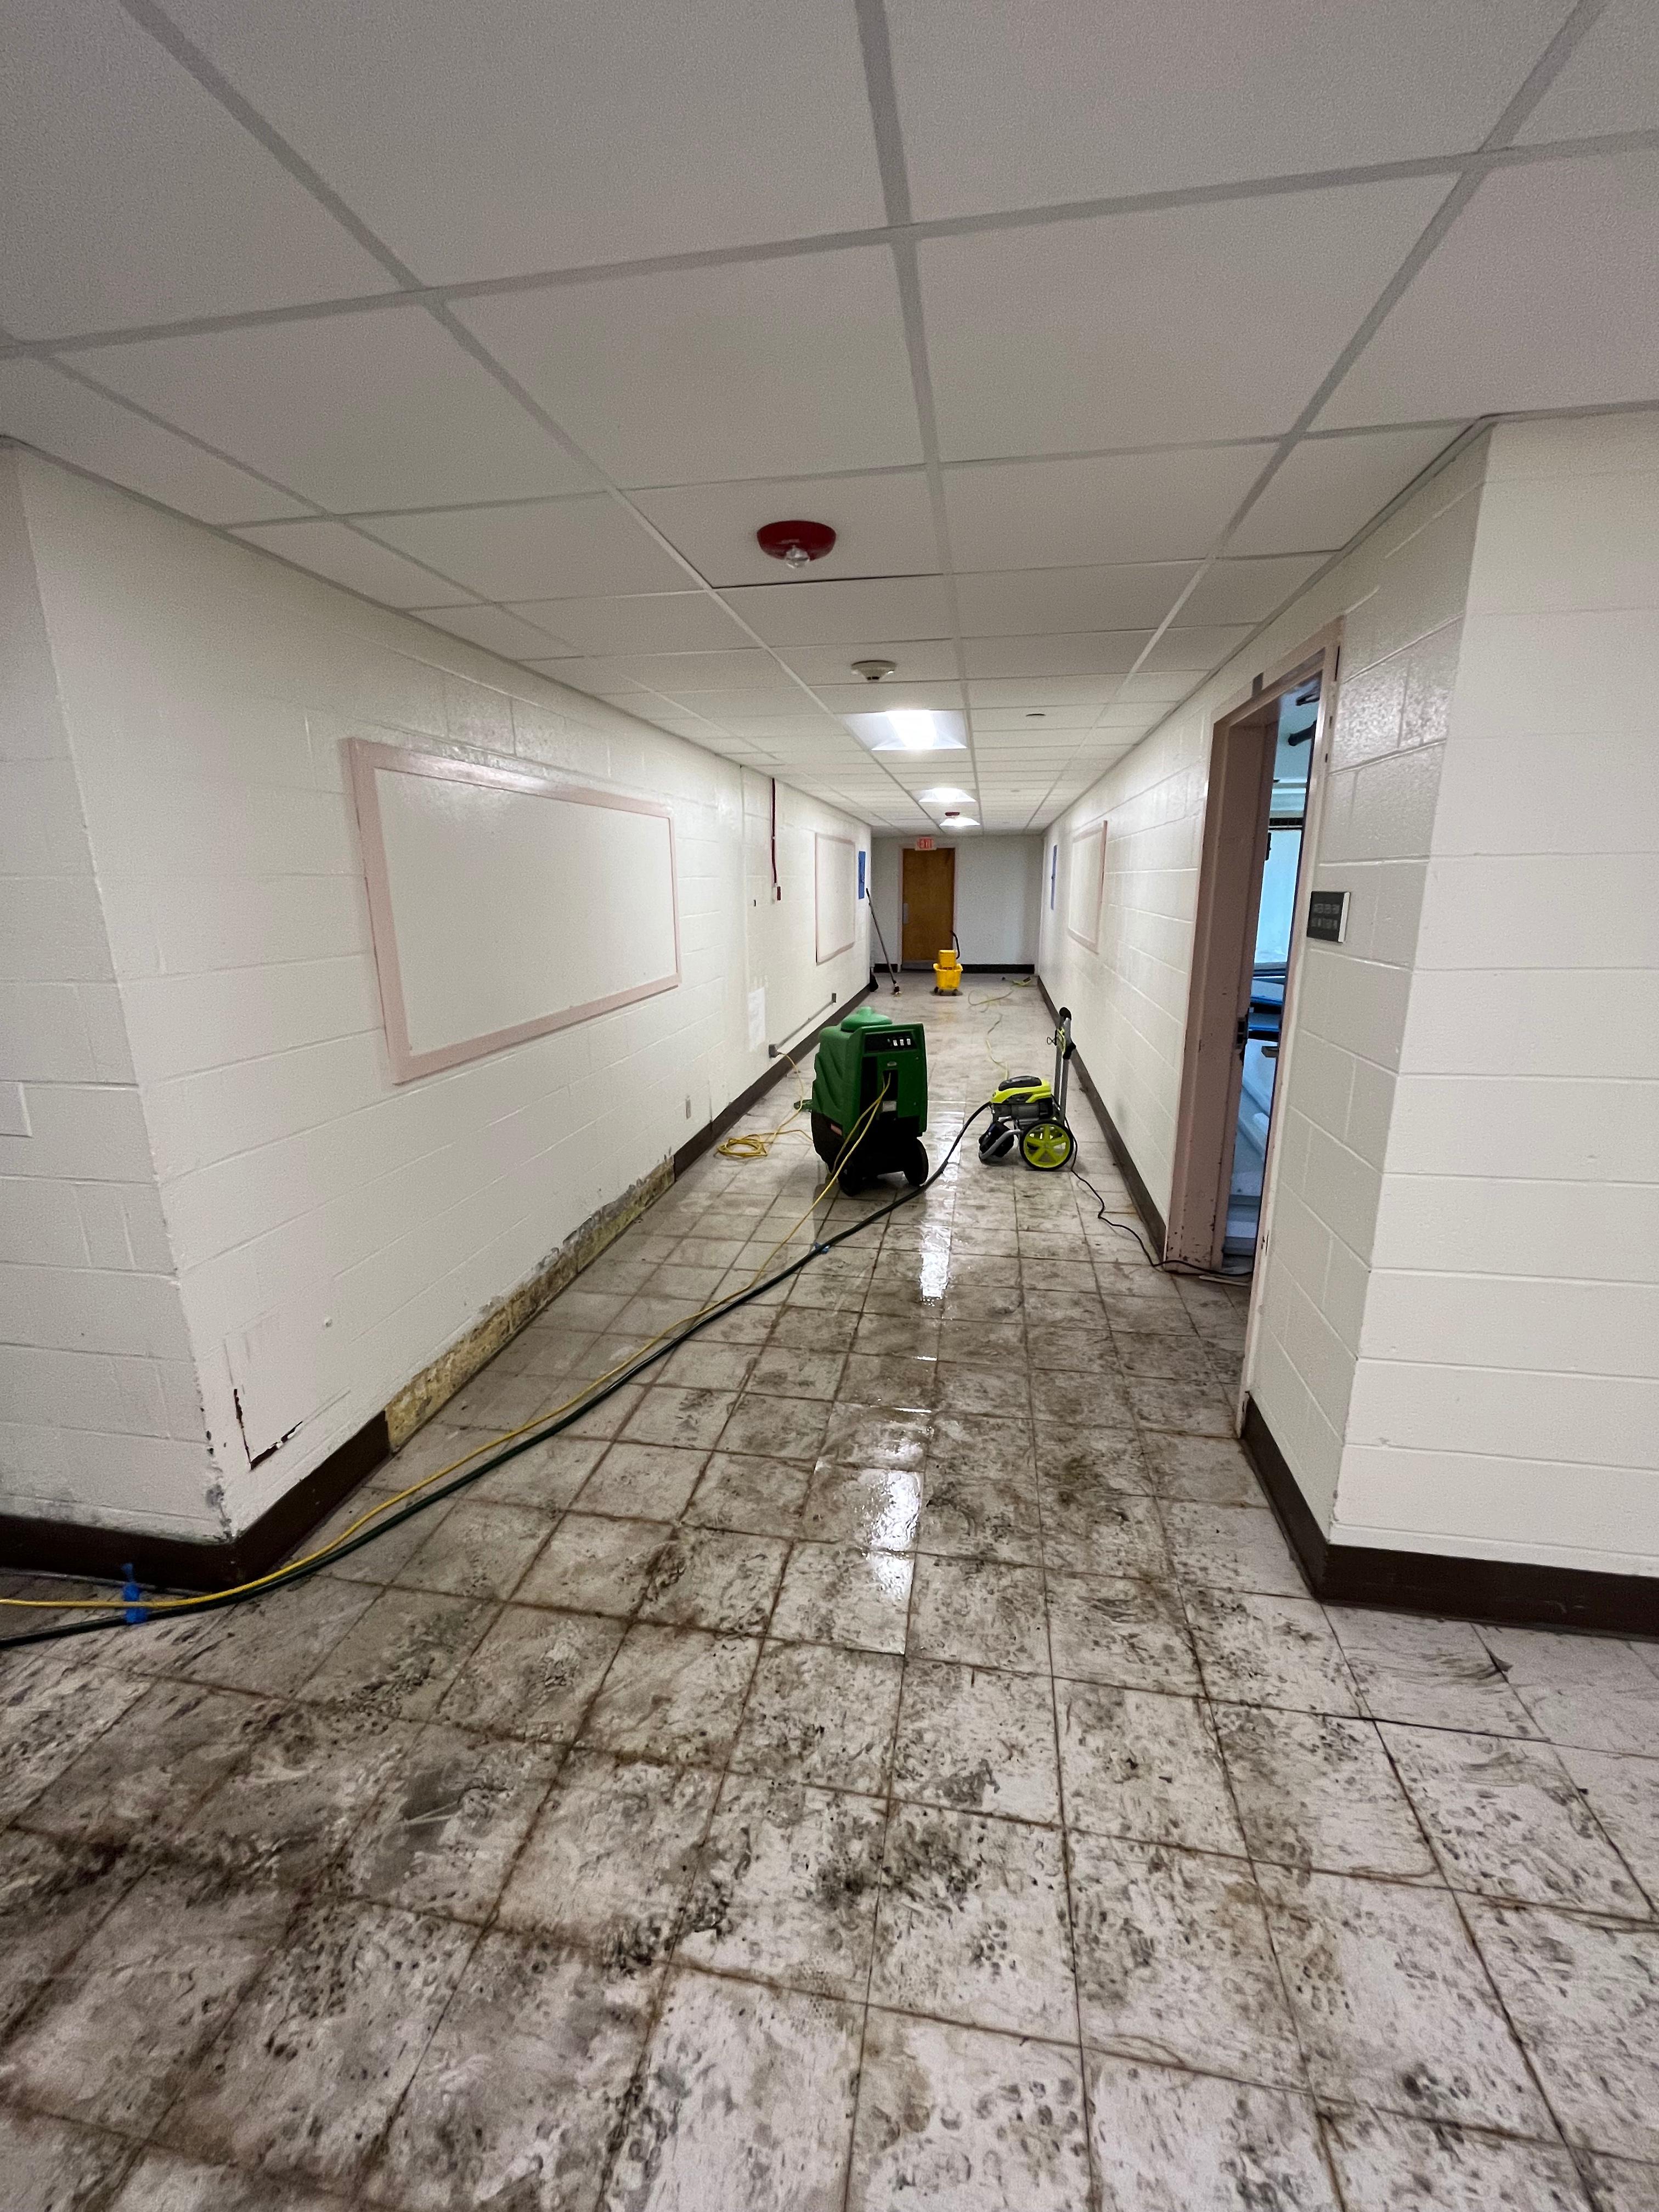 Water emergencies can happen anytime, but SERVPRO of Providence is always ready. Our commercial water loss service is available 24/7 to provide fast and effective restoration solutions for your business. Trust the experts.